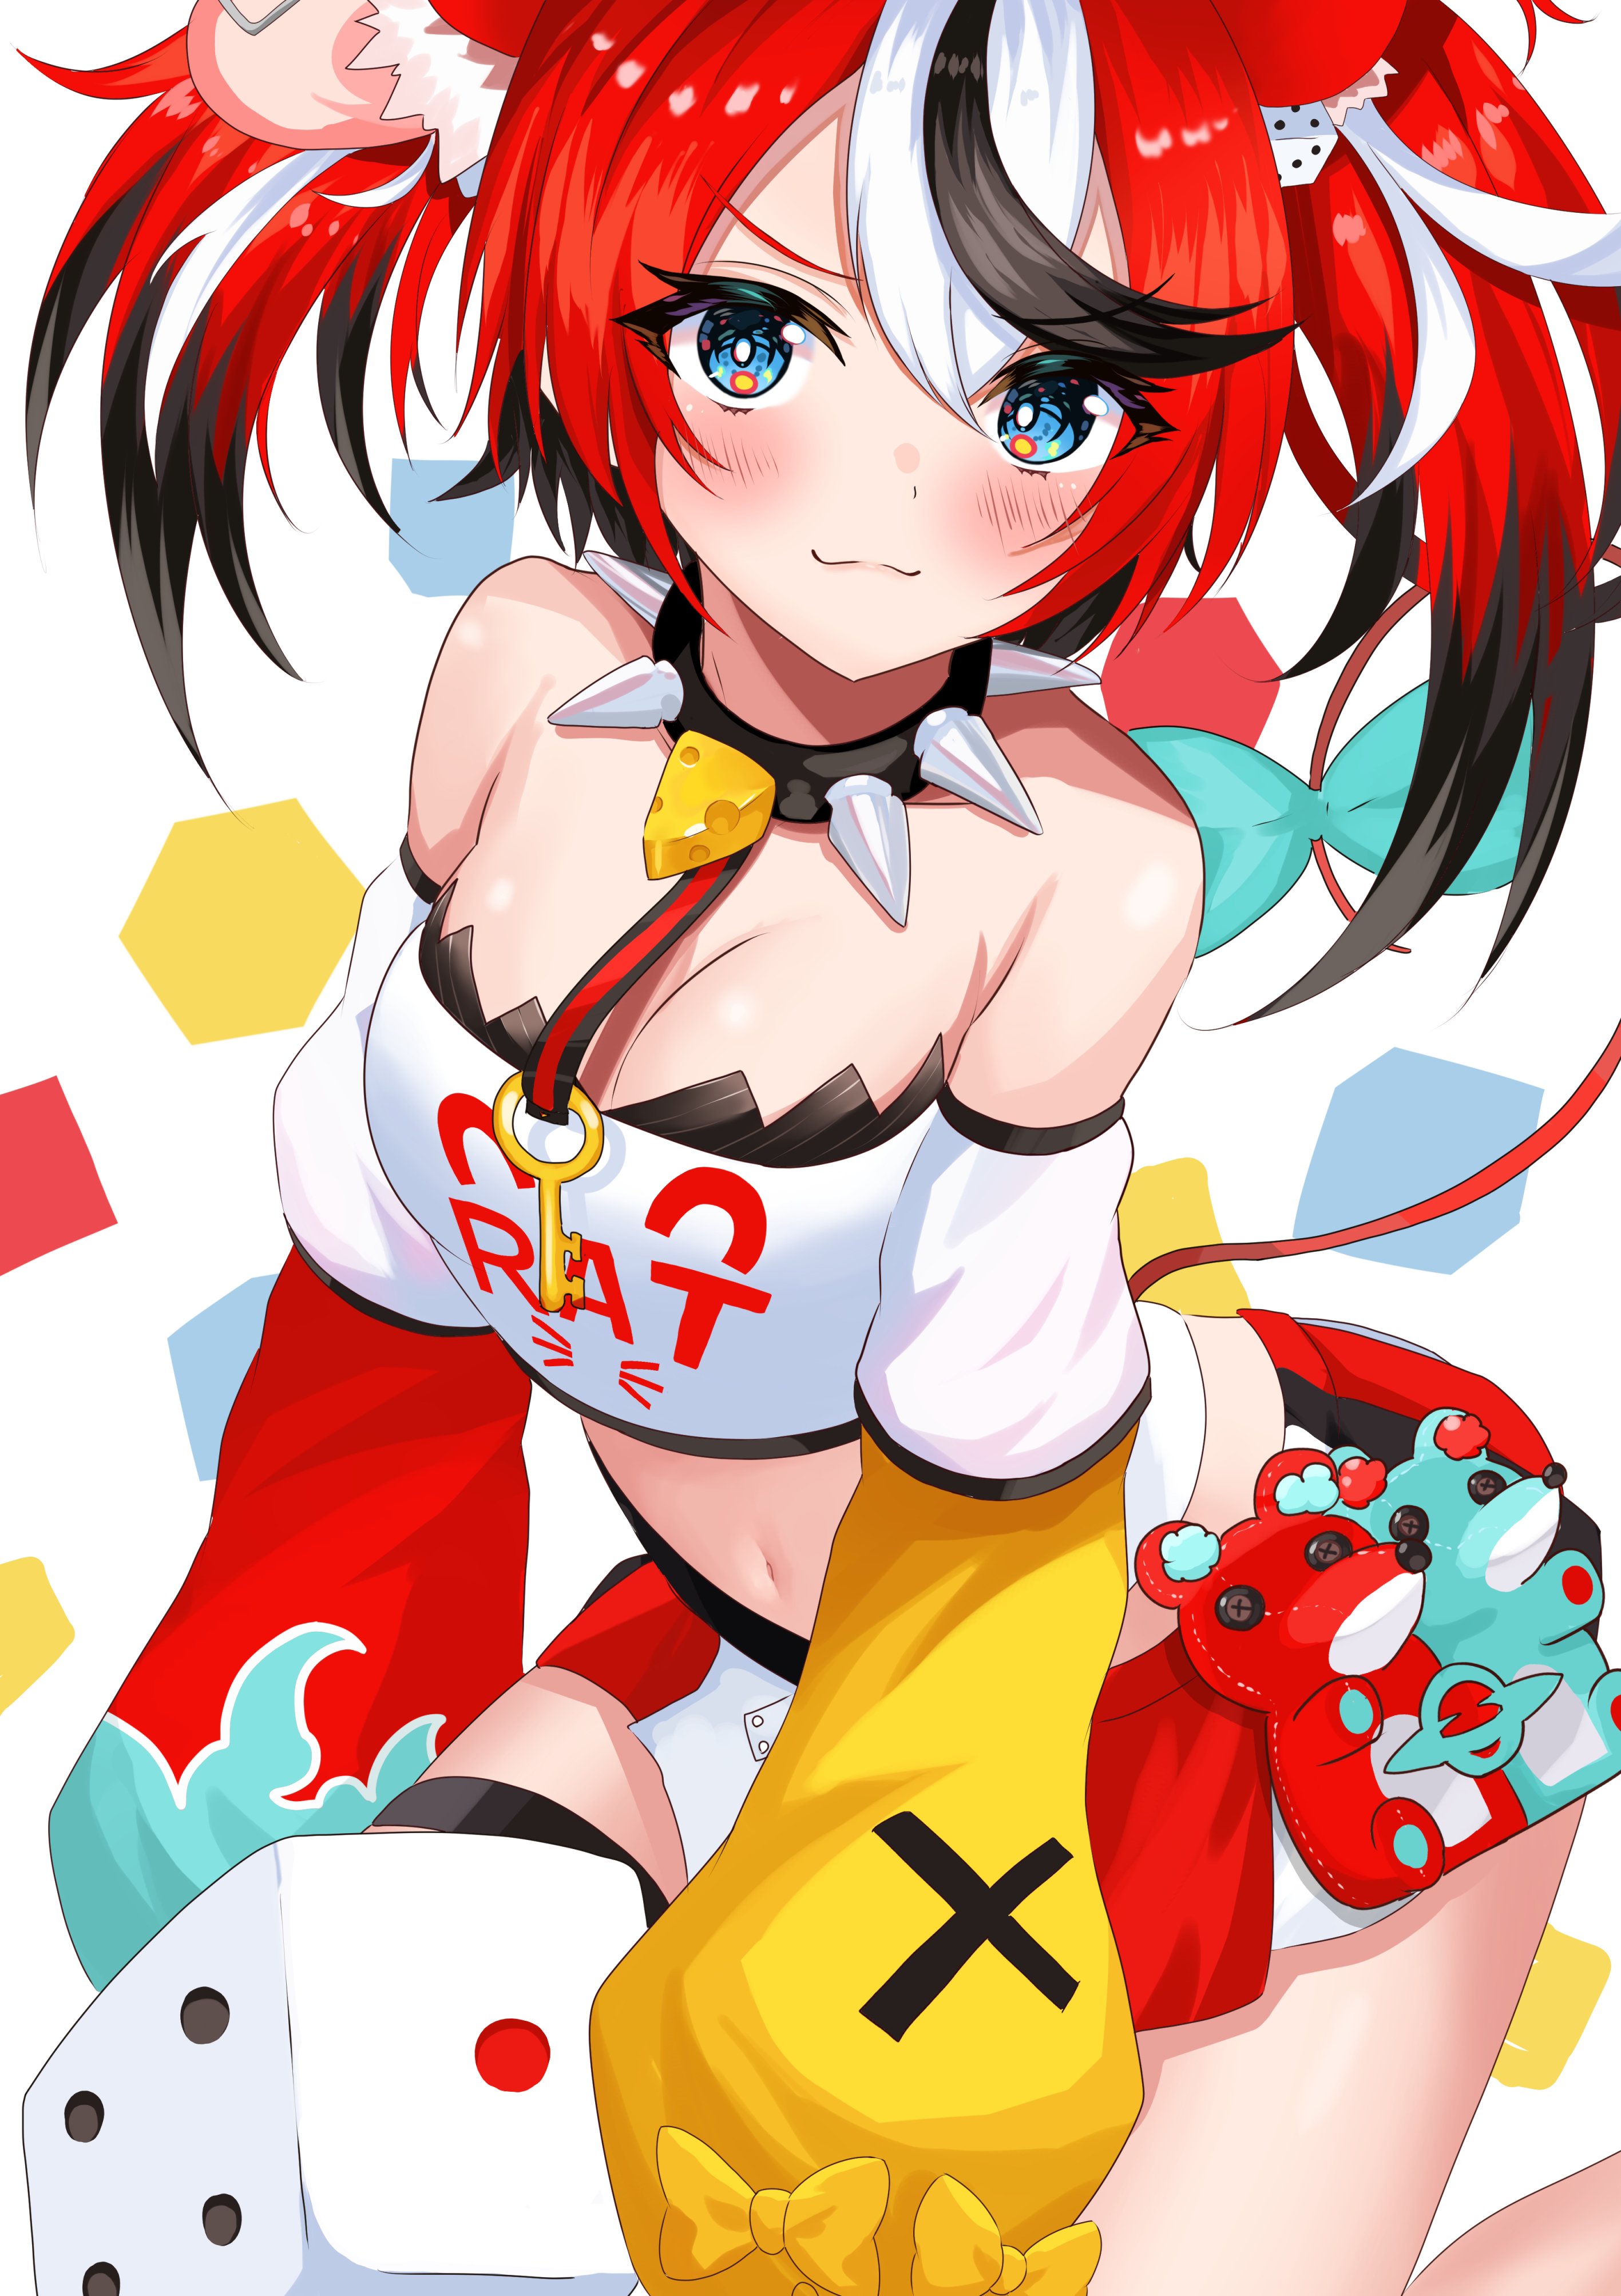 Anime 2833x4013 digital art 2D anime anime girls petite looking at viewer portrait portrait display belly belly button mouse girls redhead blue eyes artwork pale Pixiv Hololive Hakos Baelz